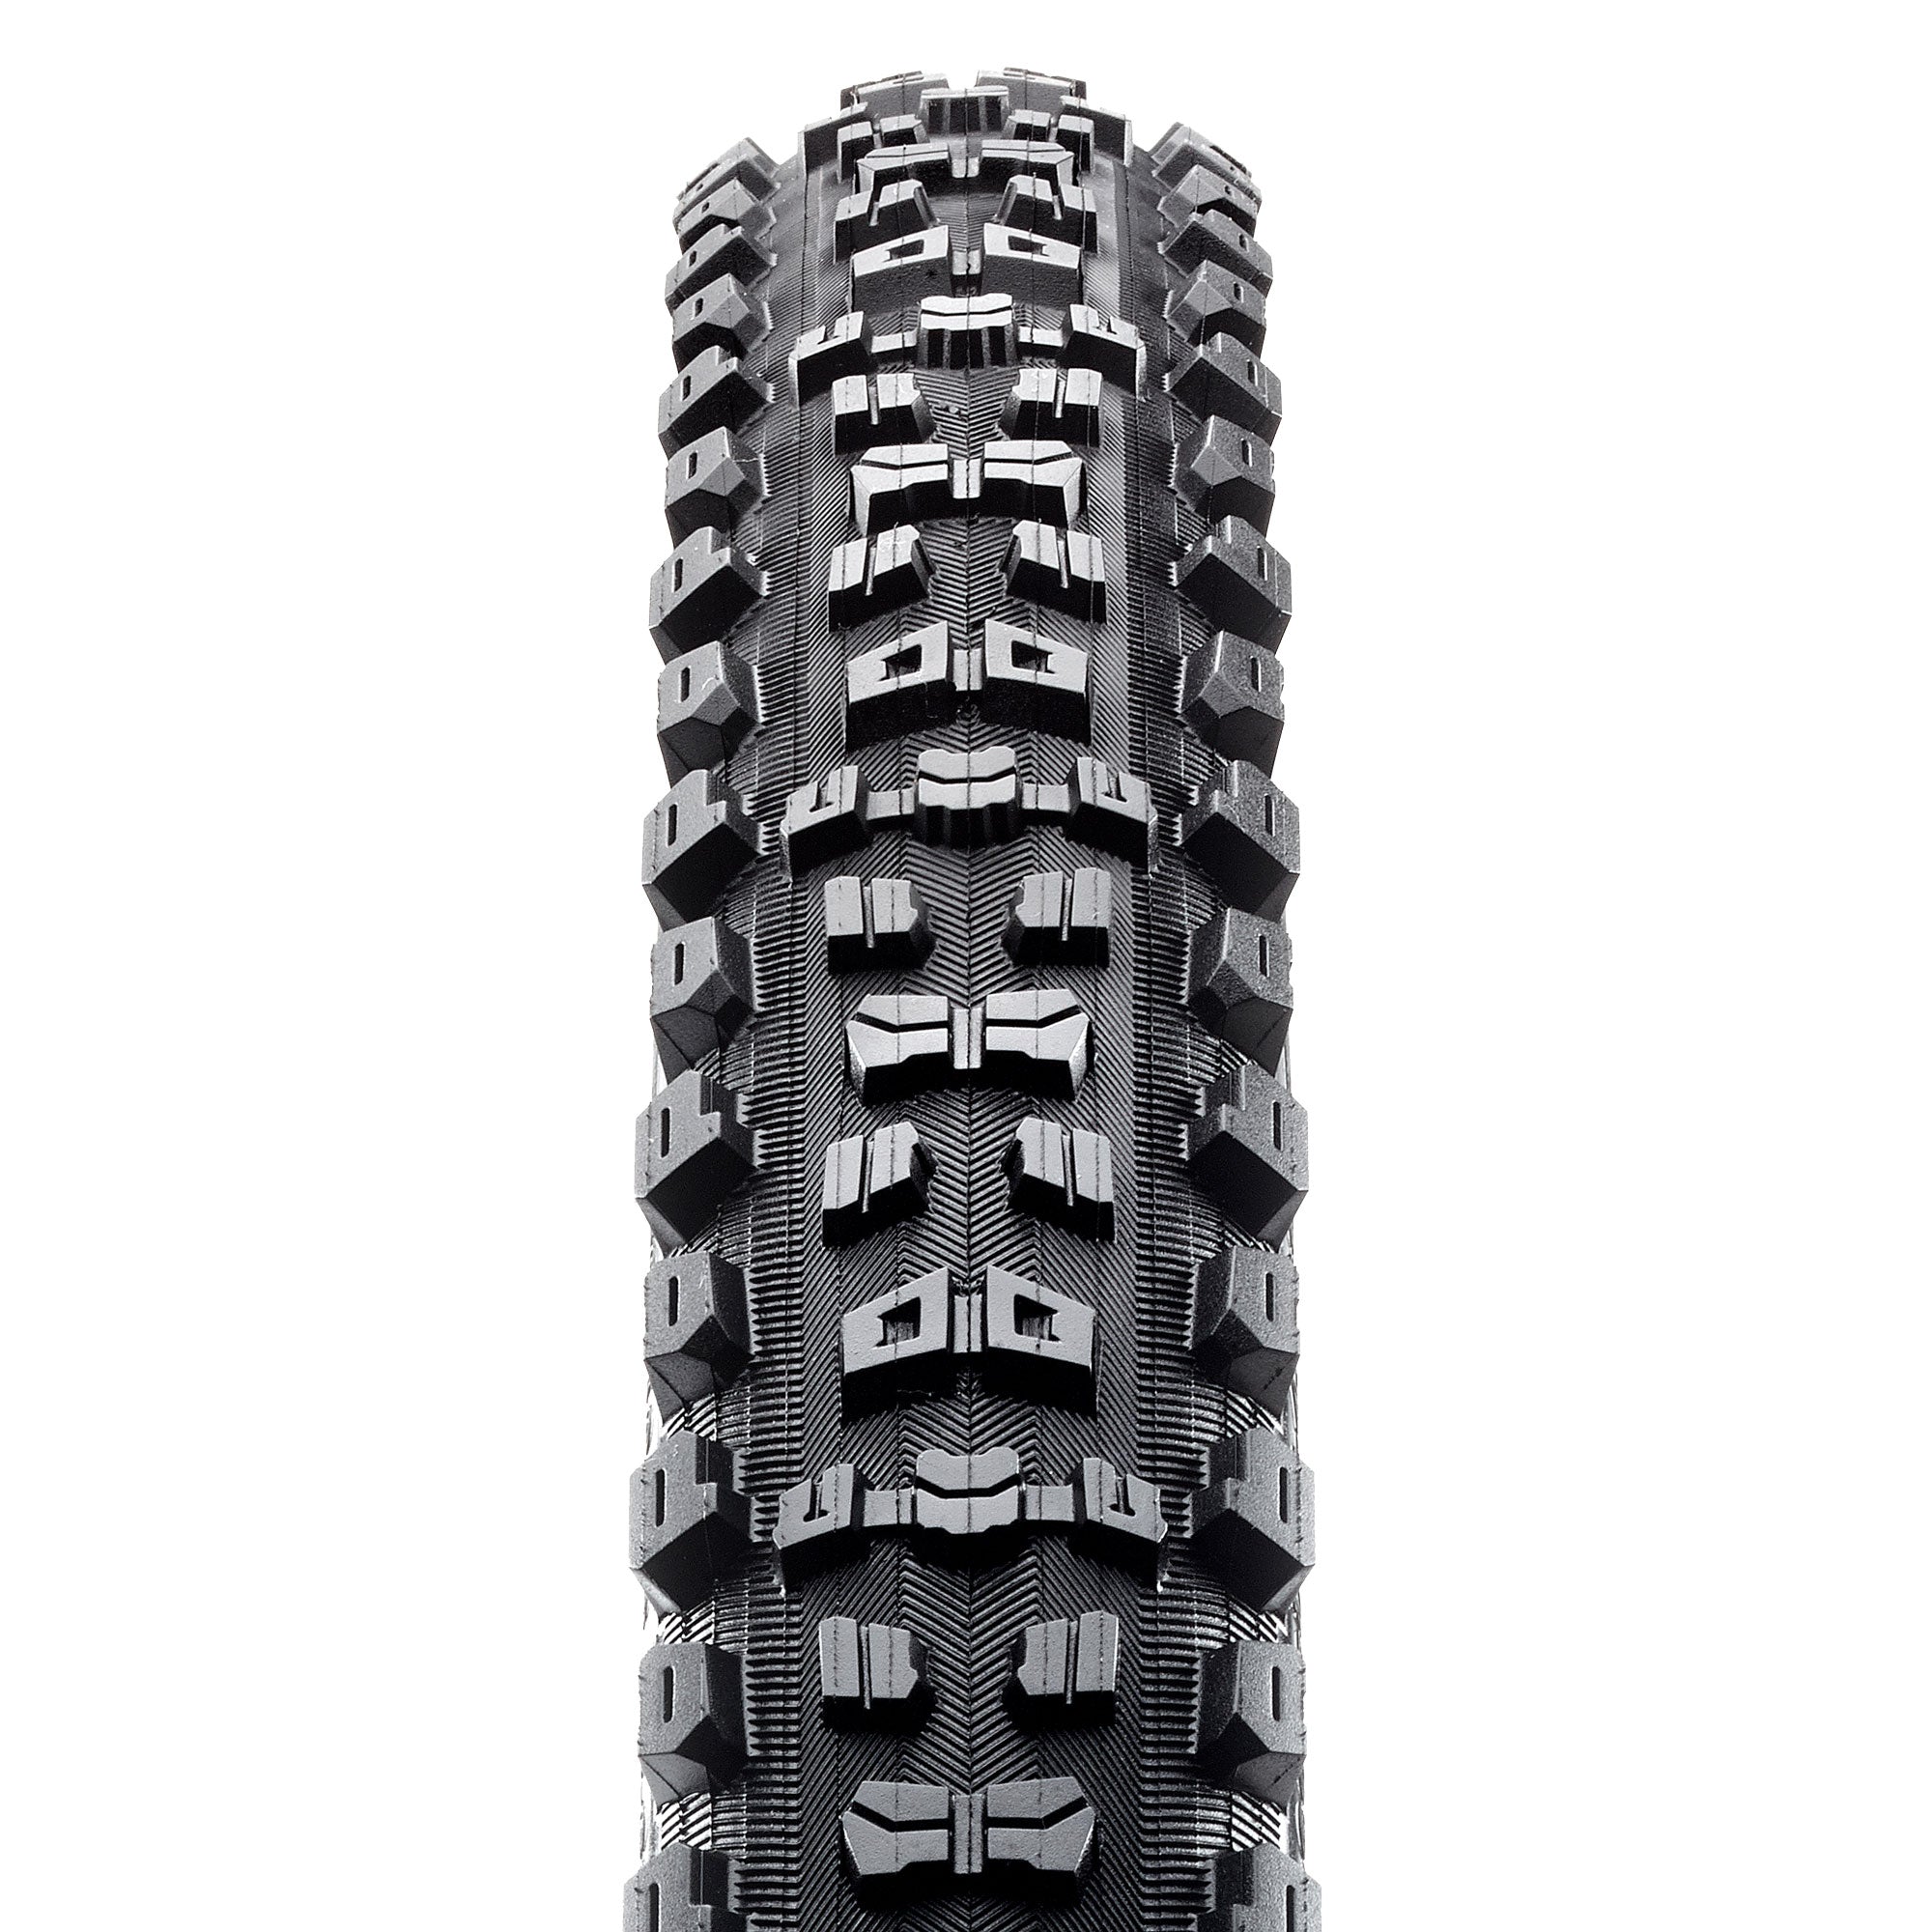 Forekaster – Maxxis Tires - USA | Shop Tires